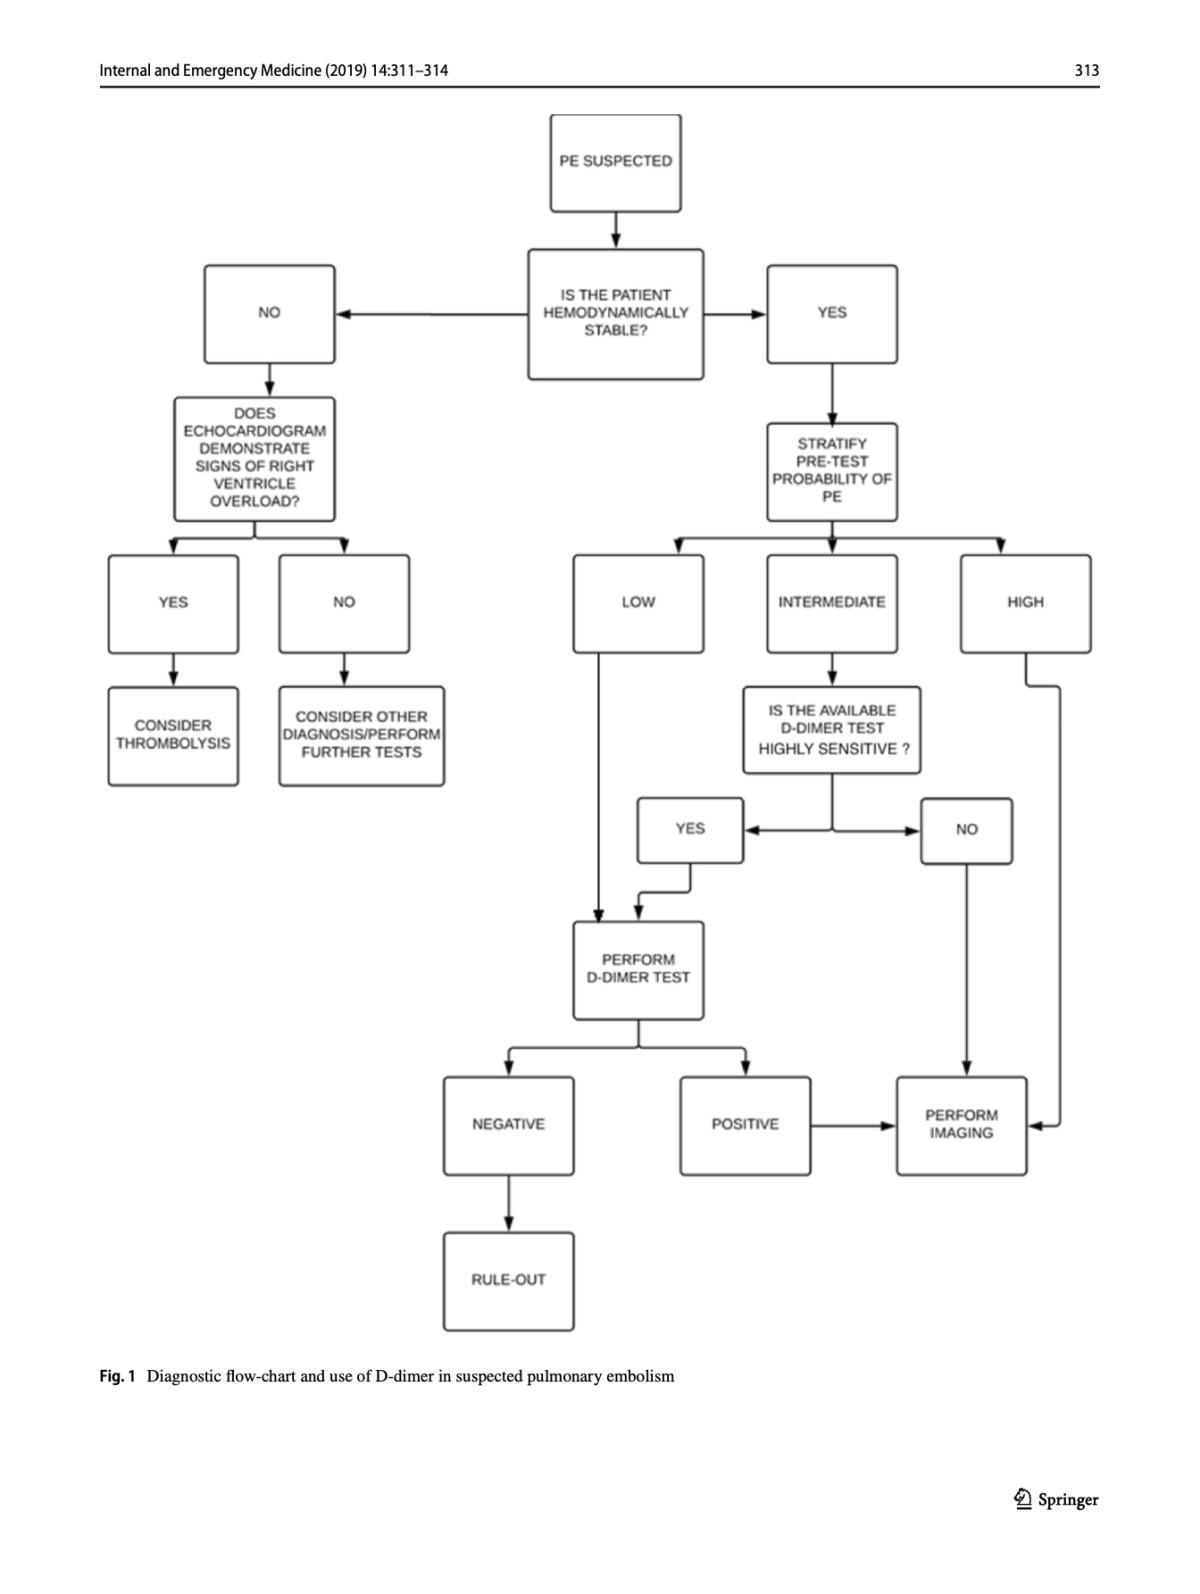 Five steps for the use and interpretation of D‐dimer in the Emergency Department